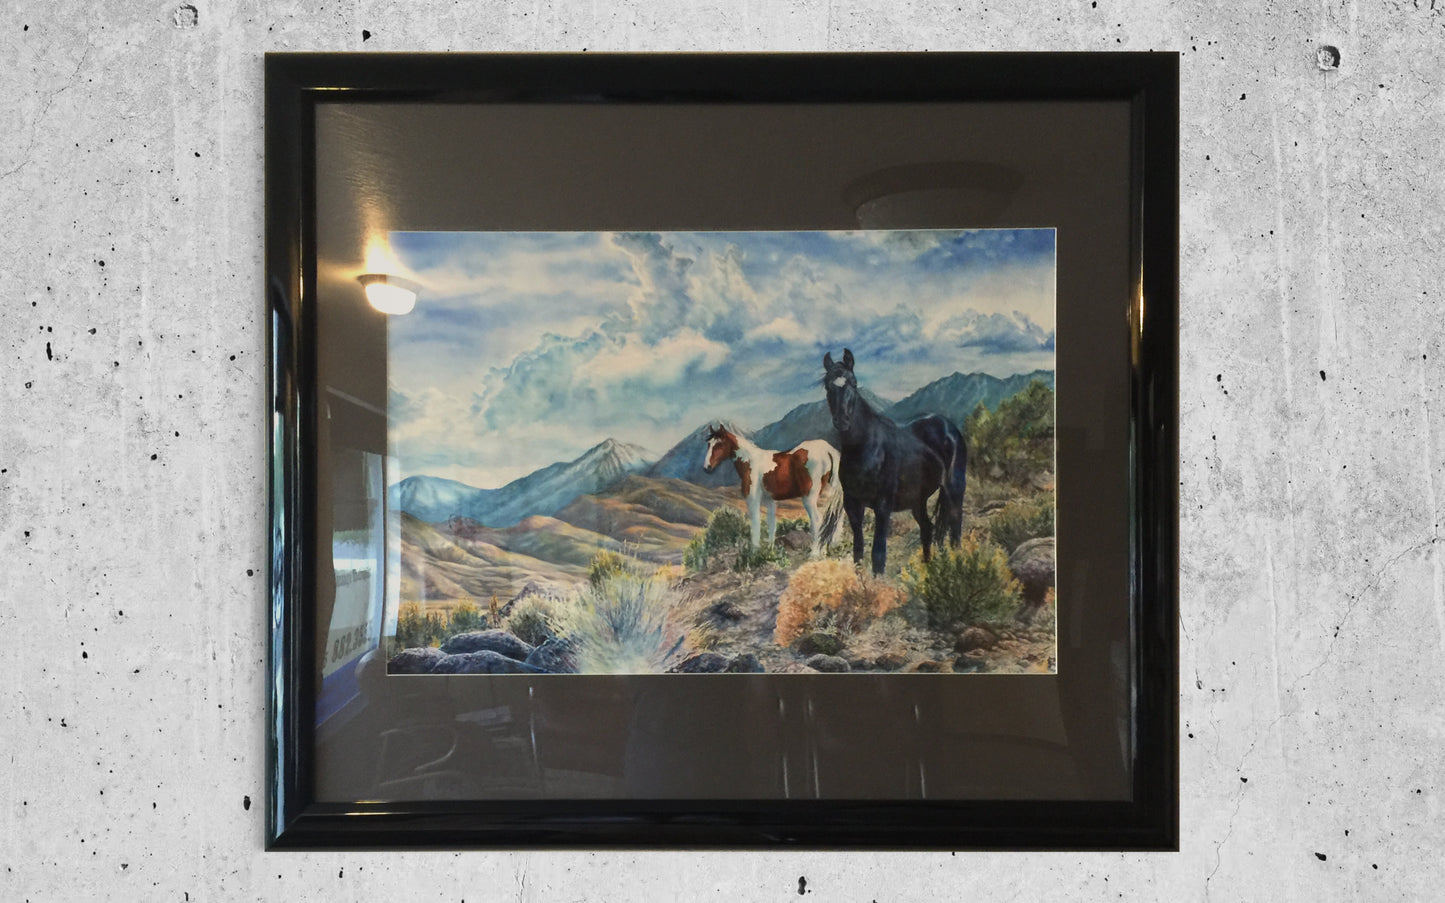 Mustangs Wild, Original Fine Art, professionally Framed, Wild Horse Art Watercolor Painting by artist Christie Marie E. Russell ©